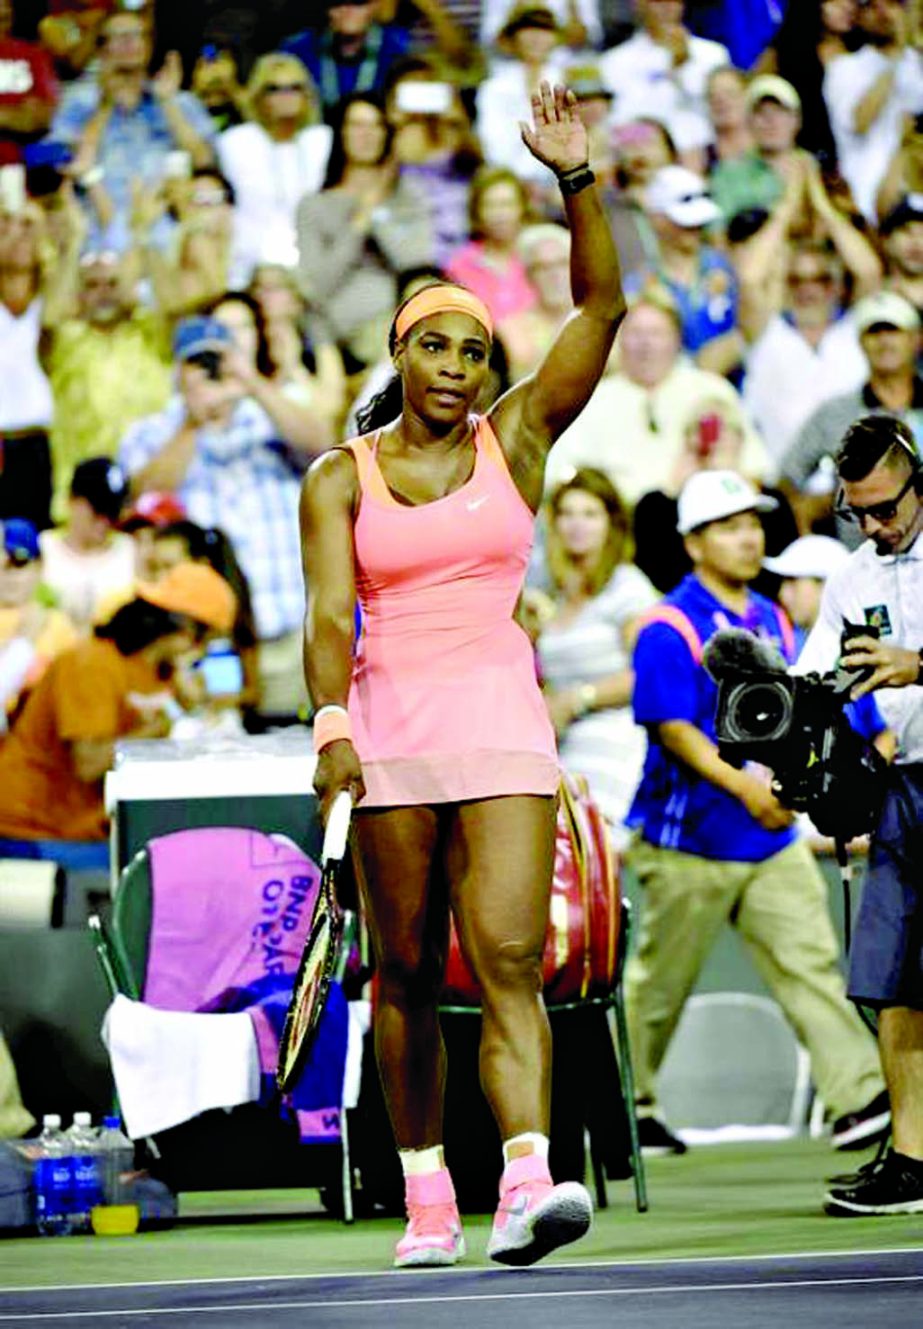 Serena Williams of the US acknowledges the crowd after her second round match against Monica Niculescu of Romania at the BNP Paribas Open tennis tournament in Indian Wells, California, USA on Friday.